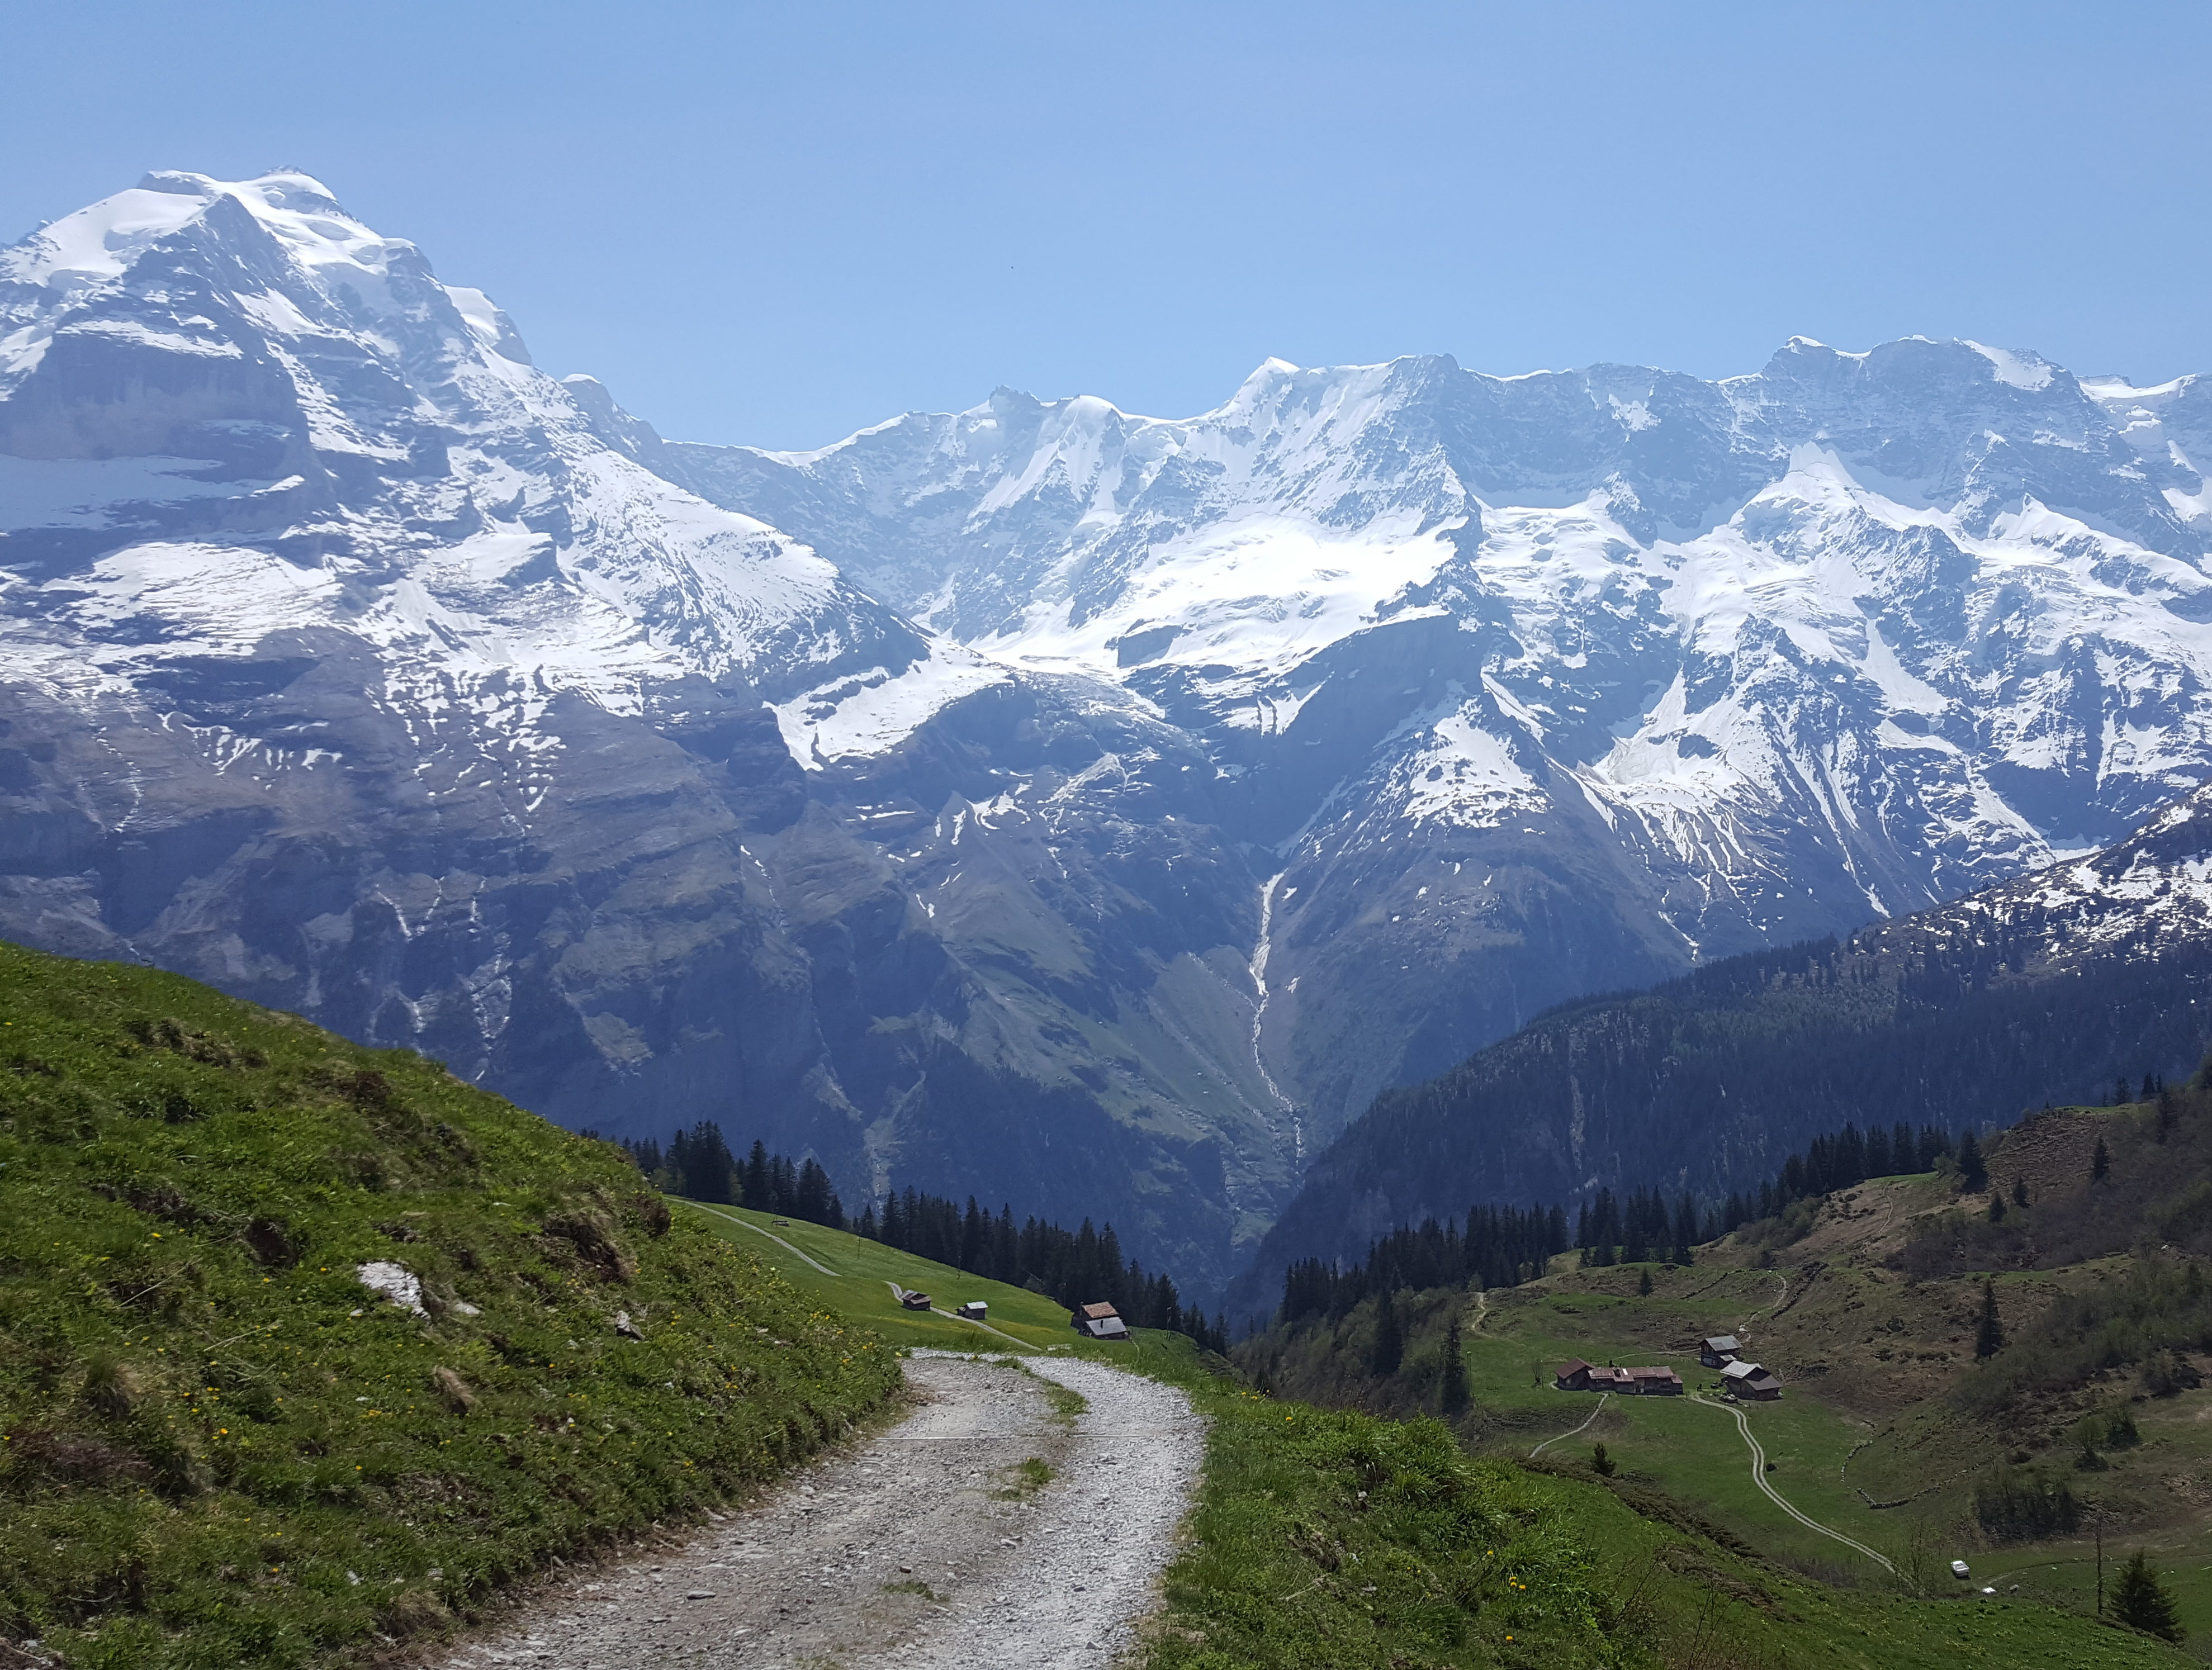 A hike along the North Face Trail in Murren, Switzerland took Meagan's breath away. 